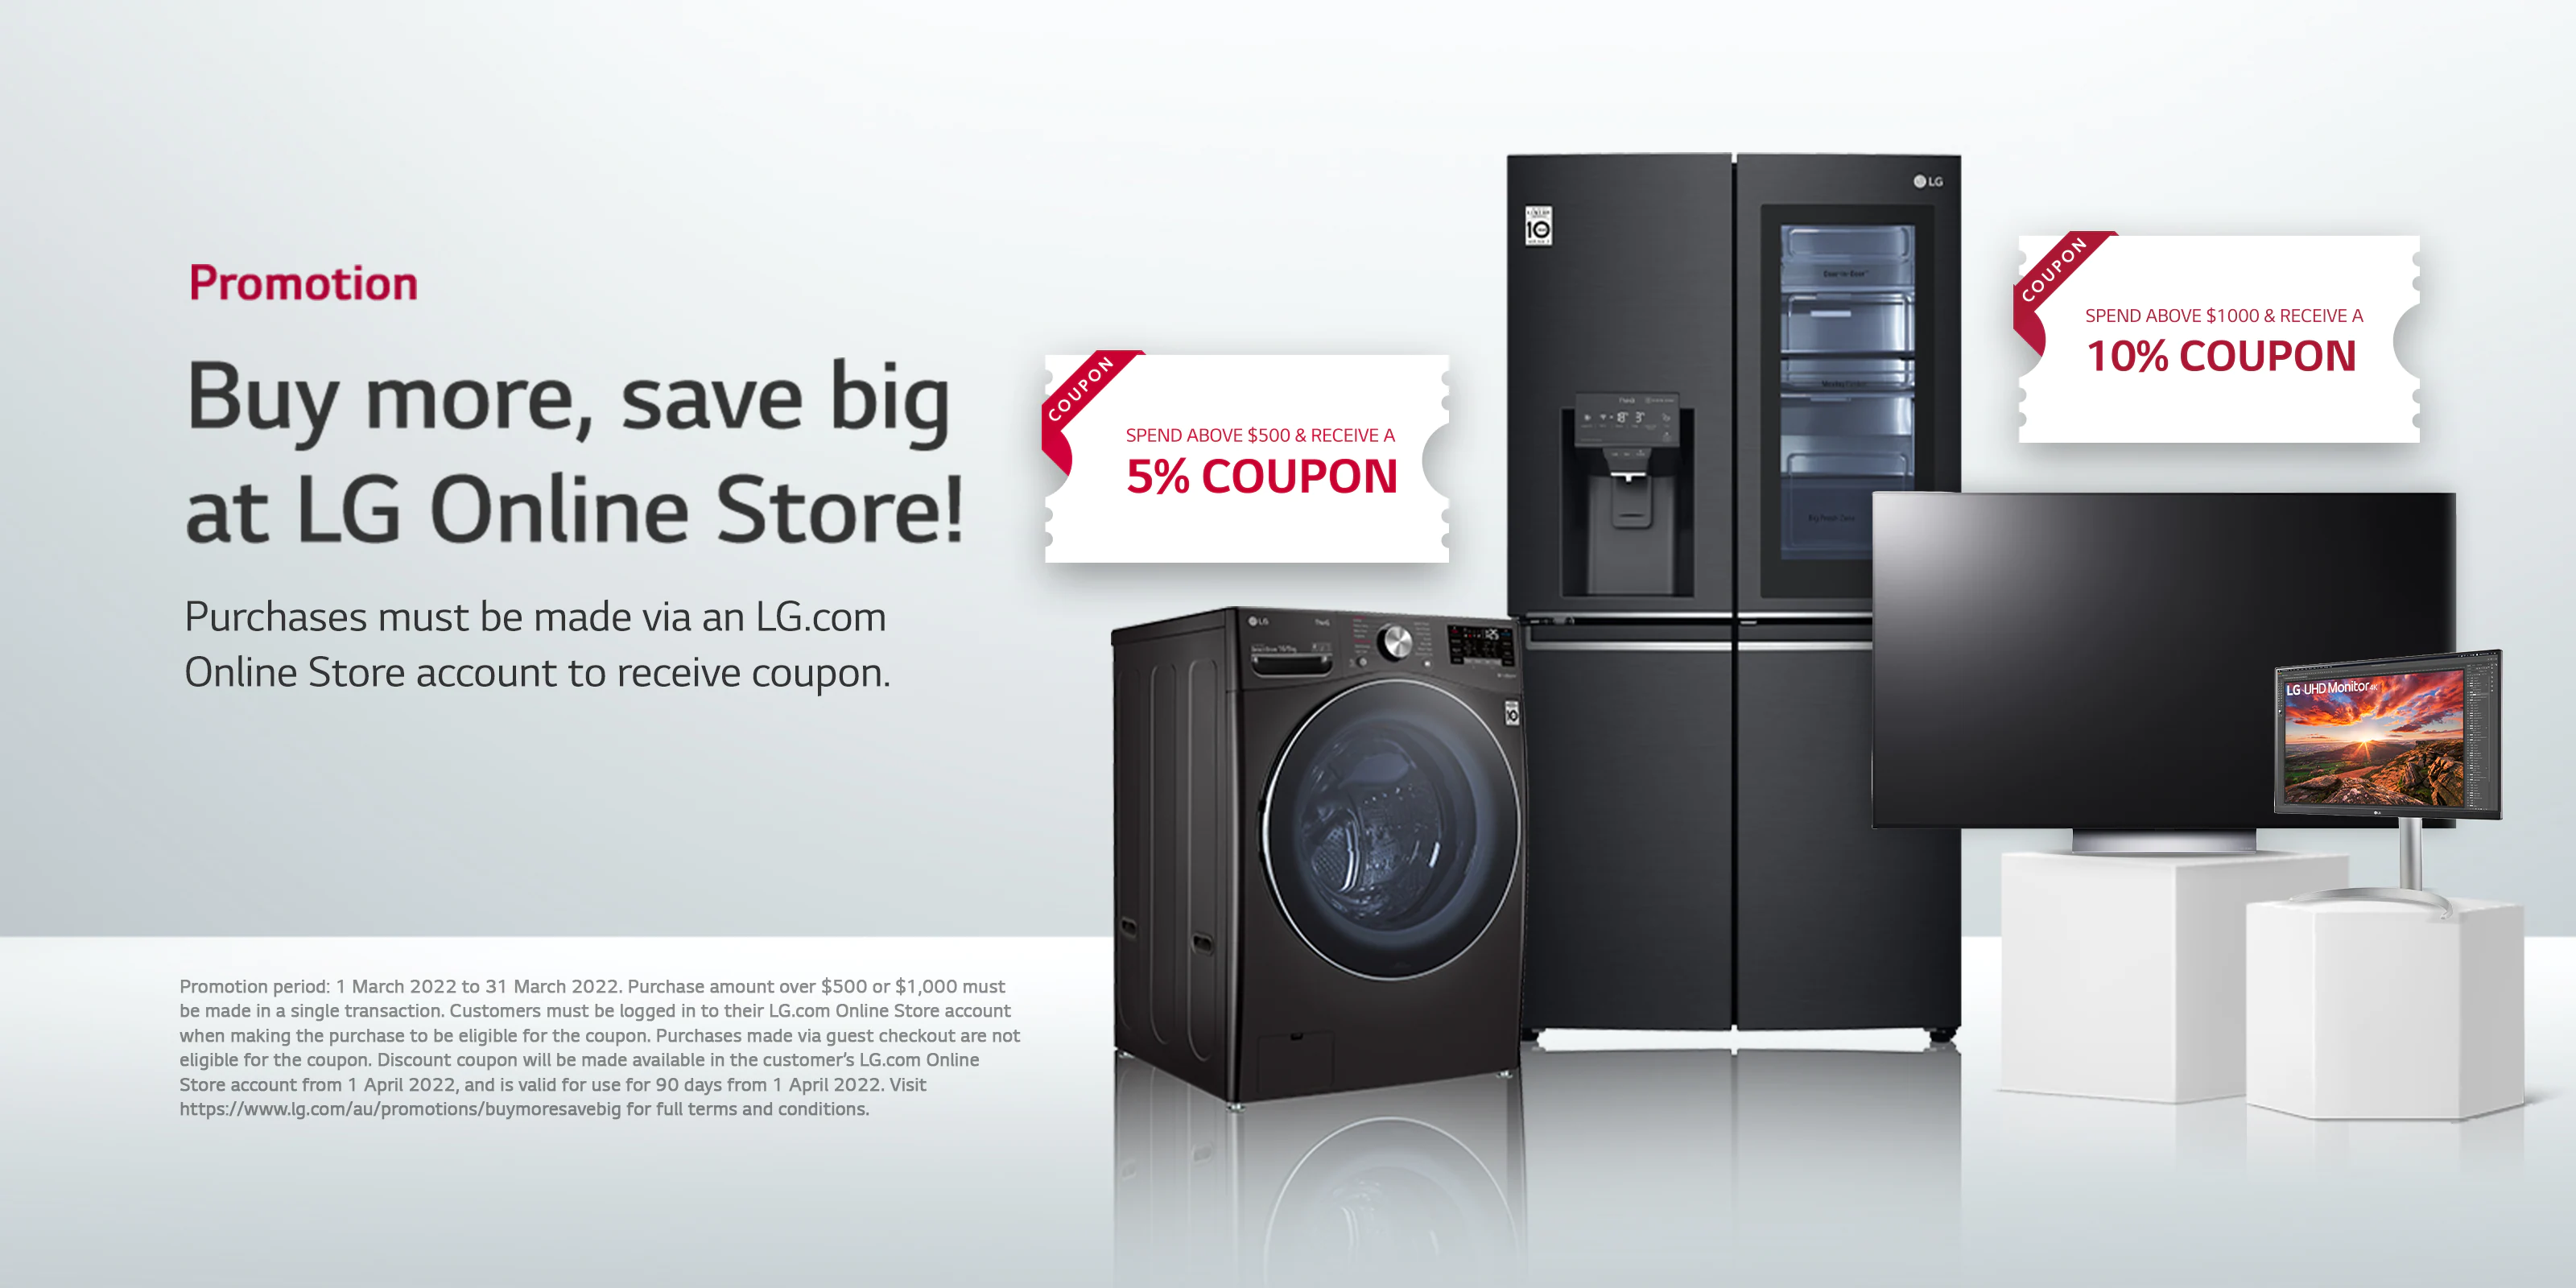 LG Australia spend & save up 10% OFF with coupon. Save on appliances, audio, video & more